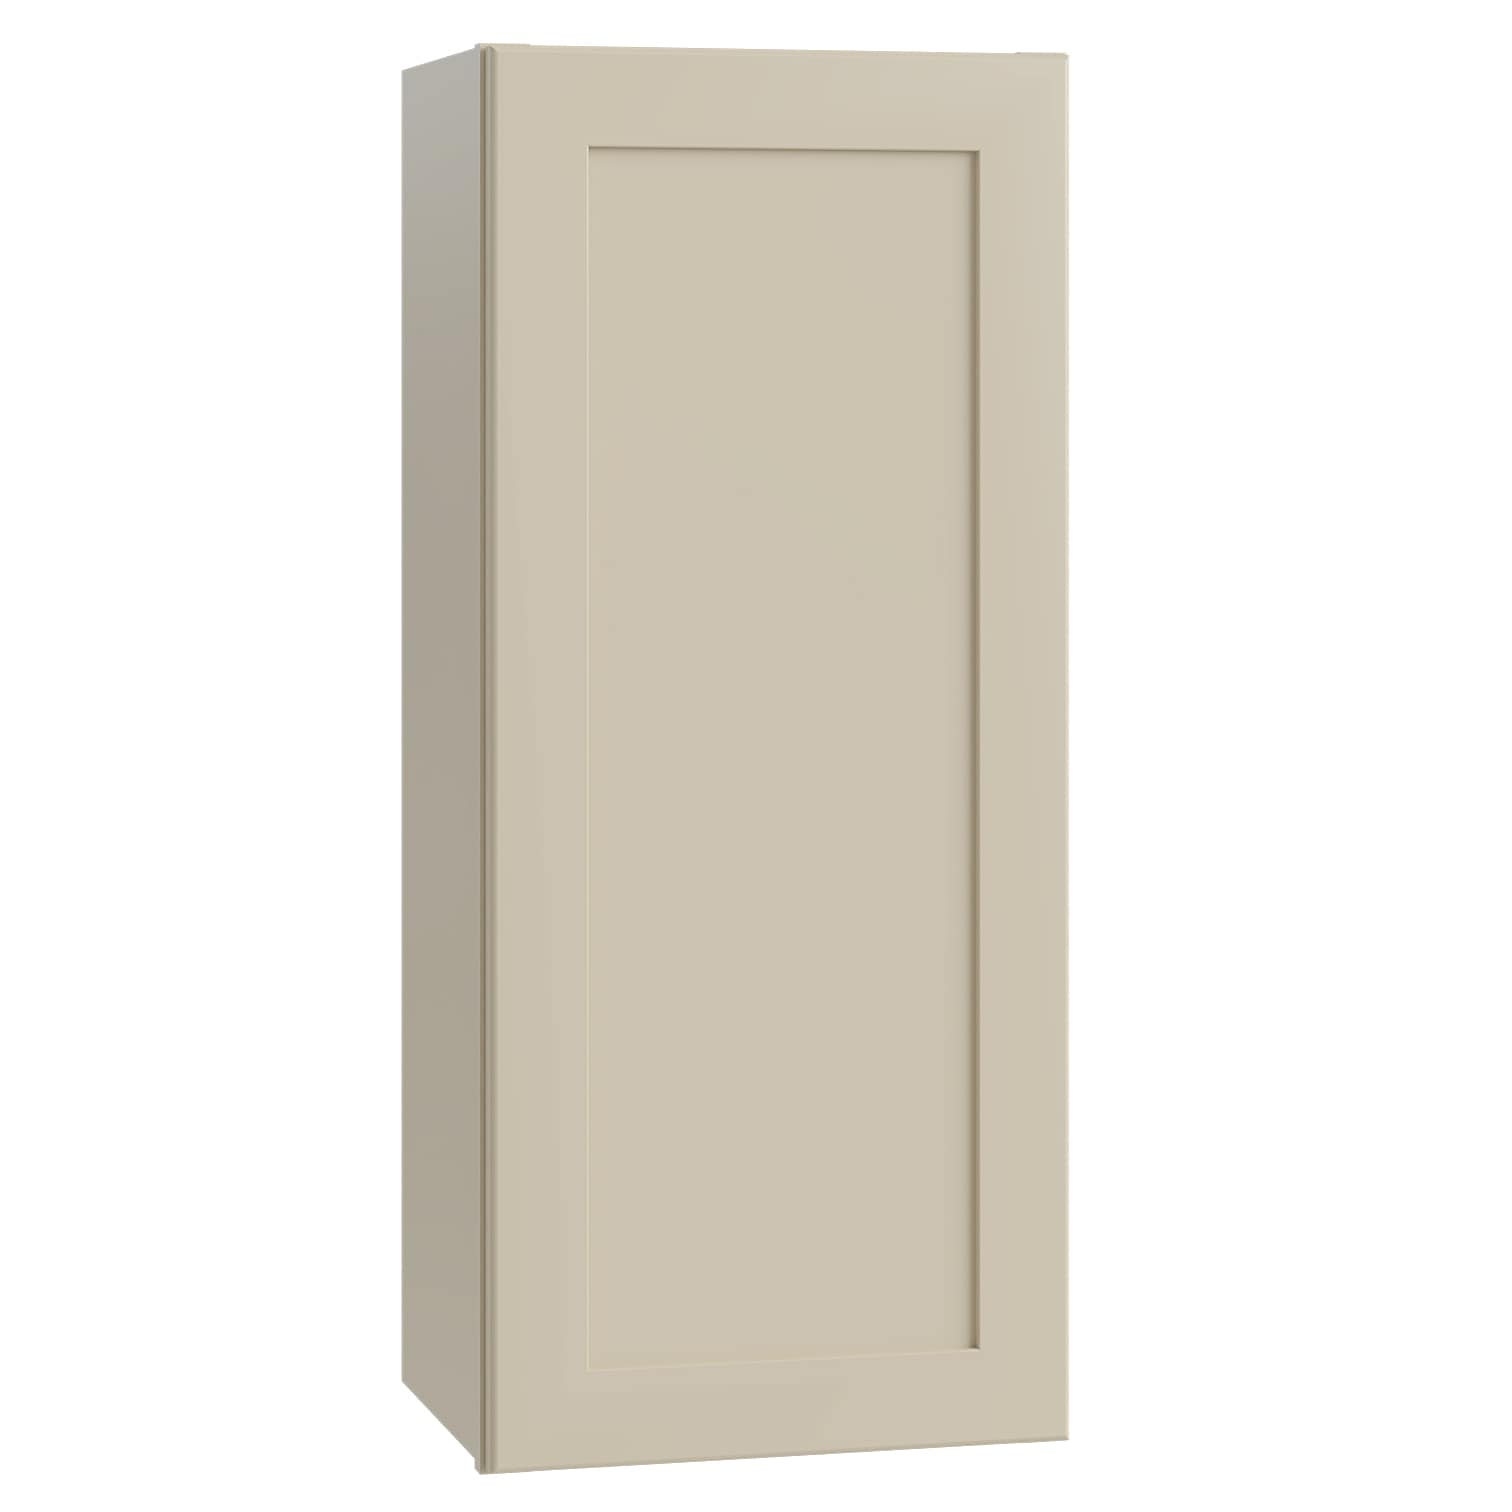 Luxxe Cabinetry 21-in W x 36-in H x 12-in D Norfolk Blended Cream Painted Door Wall Fully Assembled Semi-custom Cabinet in Off-White | W2136L-NBC